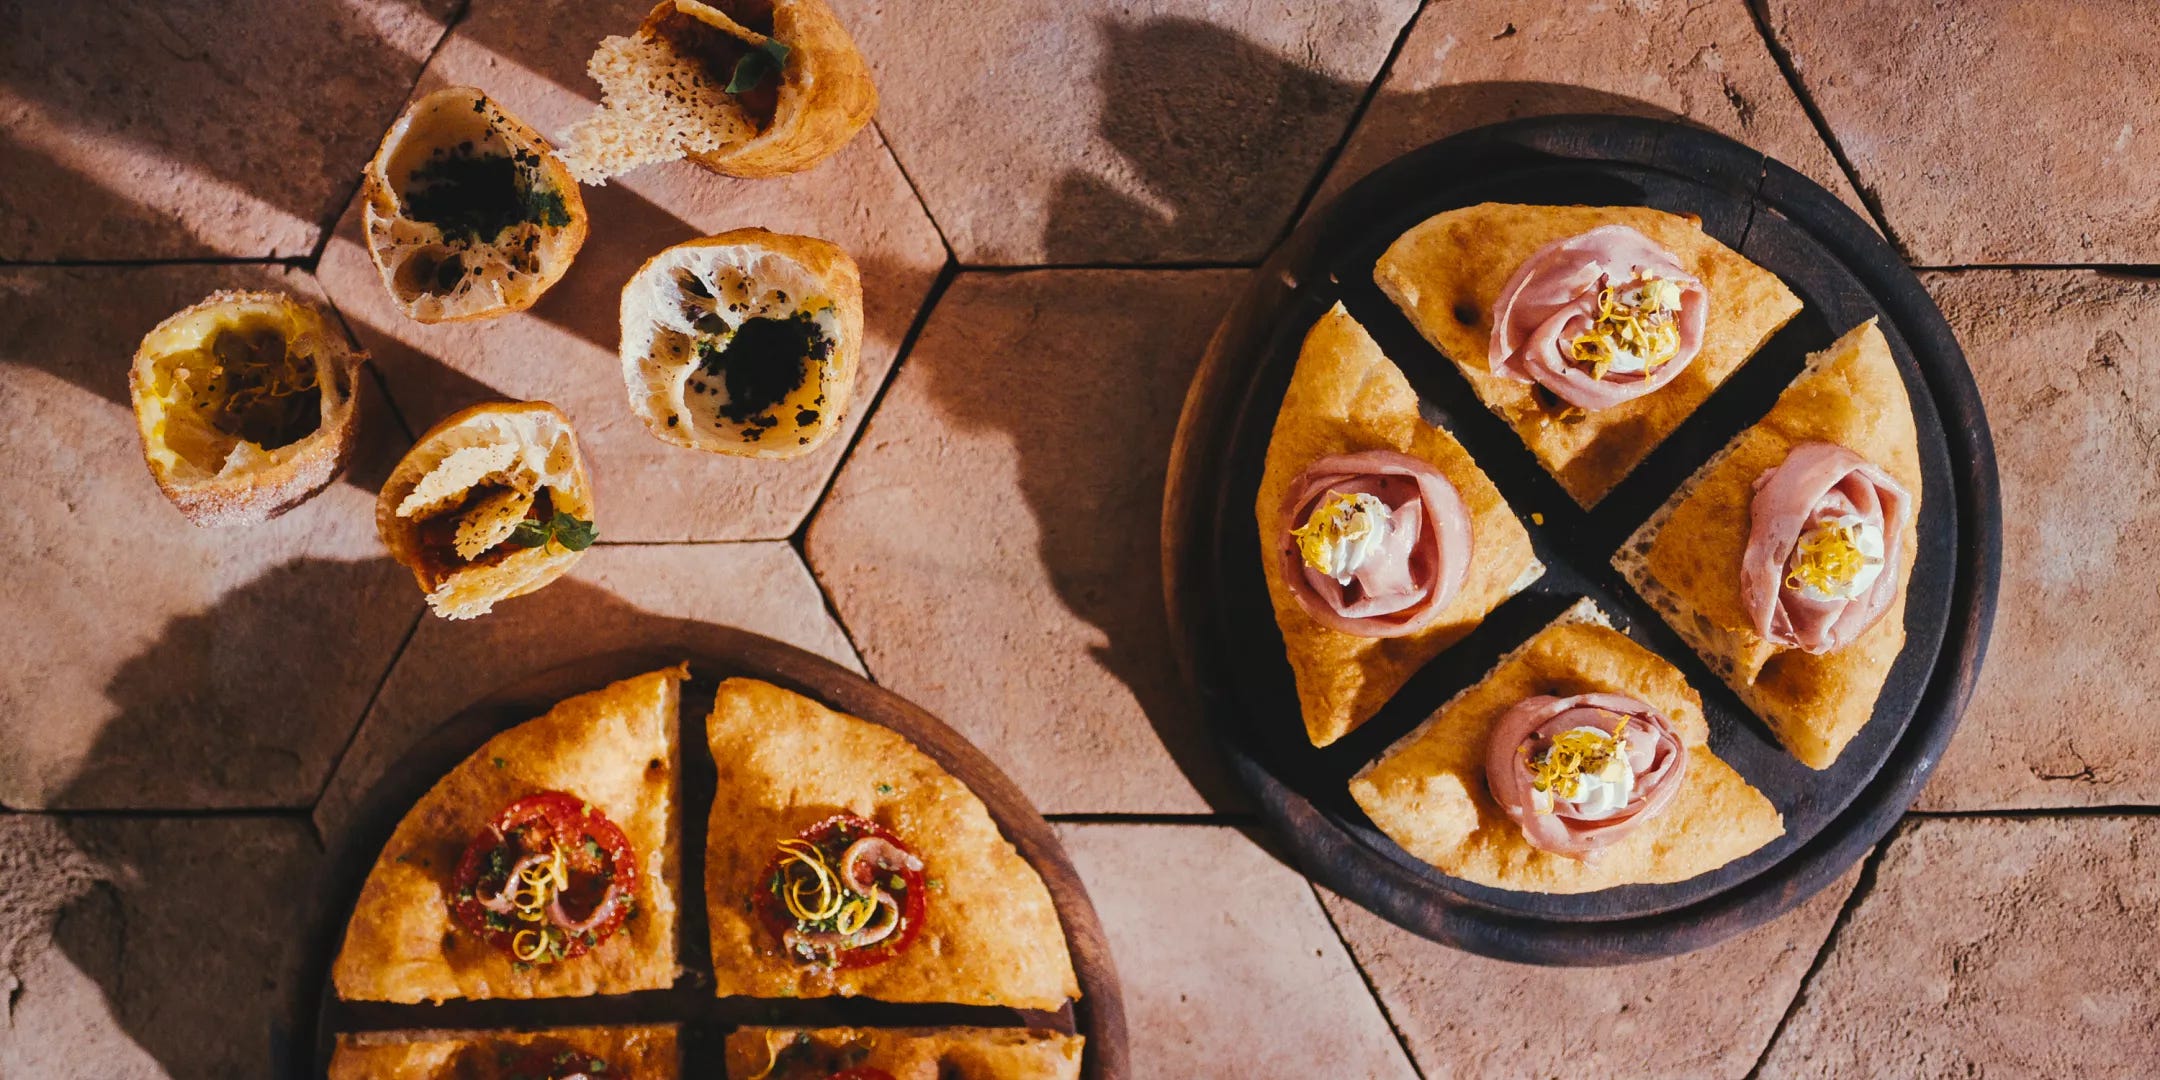 Chef's Depot - Itza pizza party! 🍕 BUT why order in when you can make it  yourself?! Make it a night to remember with our mini pizza oven:    #ChefsDepot #Pizza #ItsTheWeekendBaby #